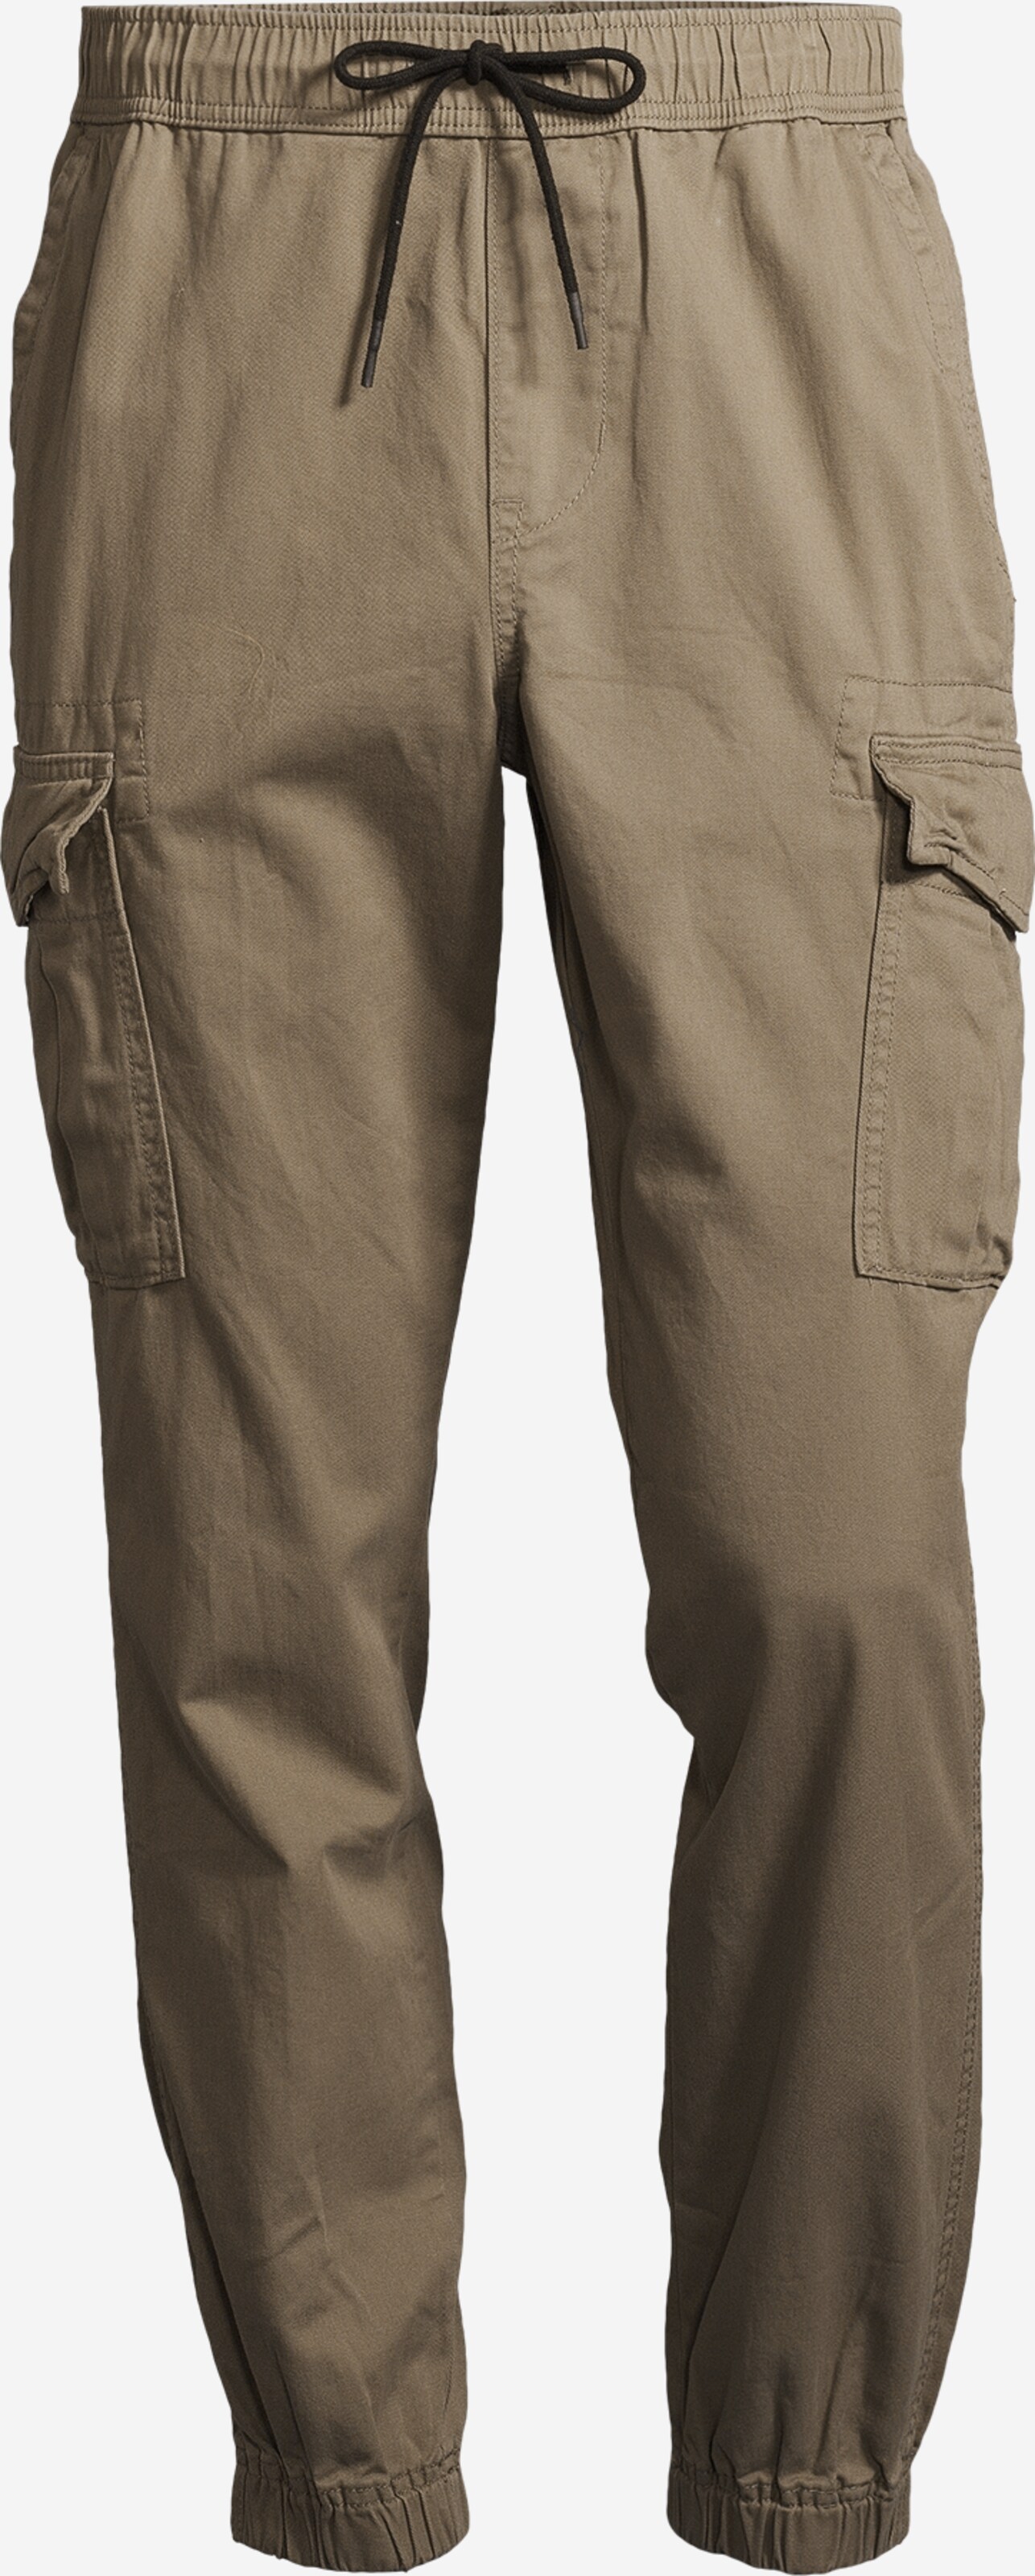 AÉROPOSTALE Tapered Cargo Pants in Khaki